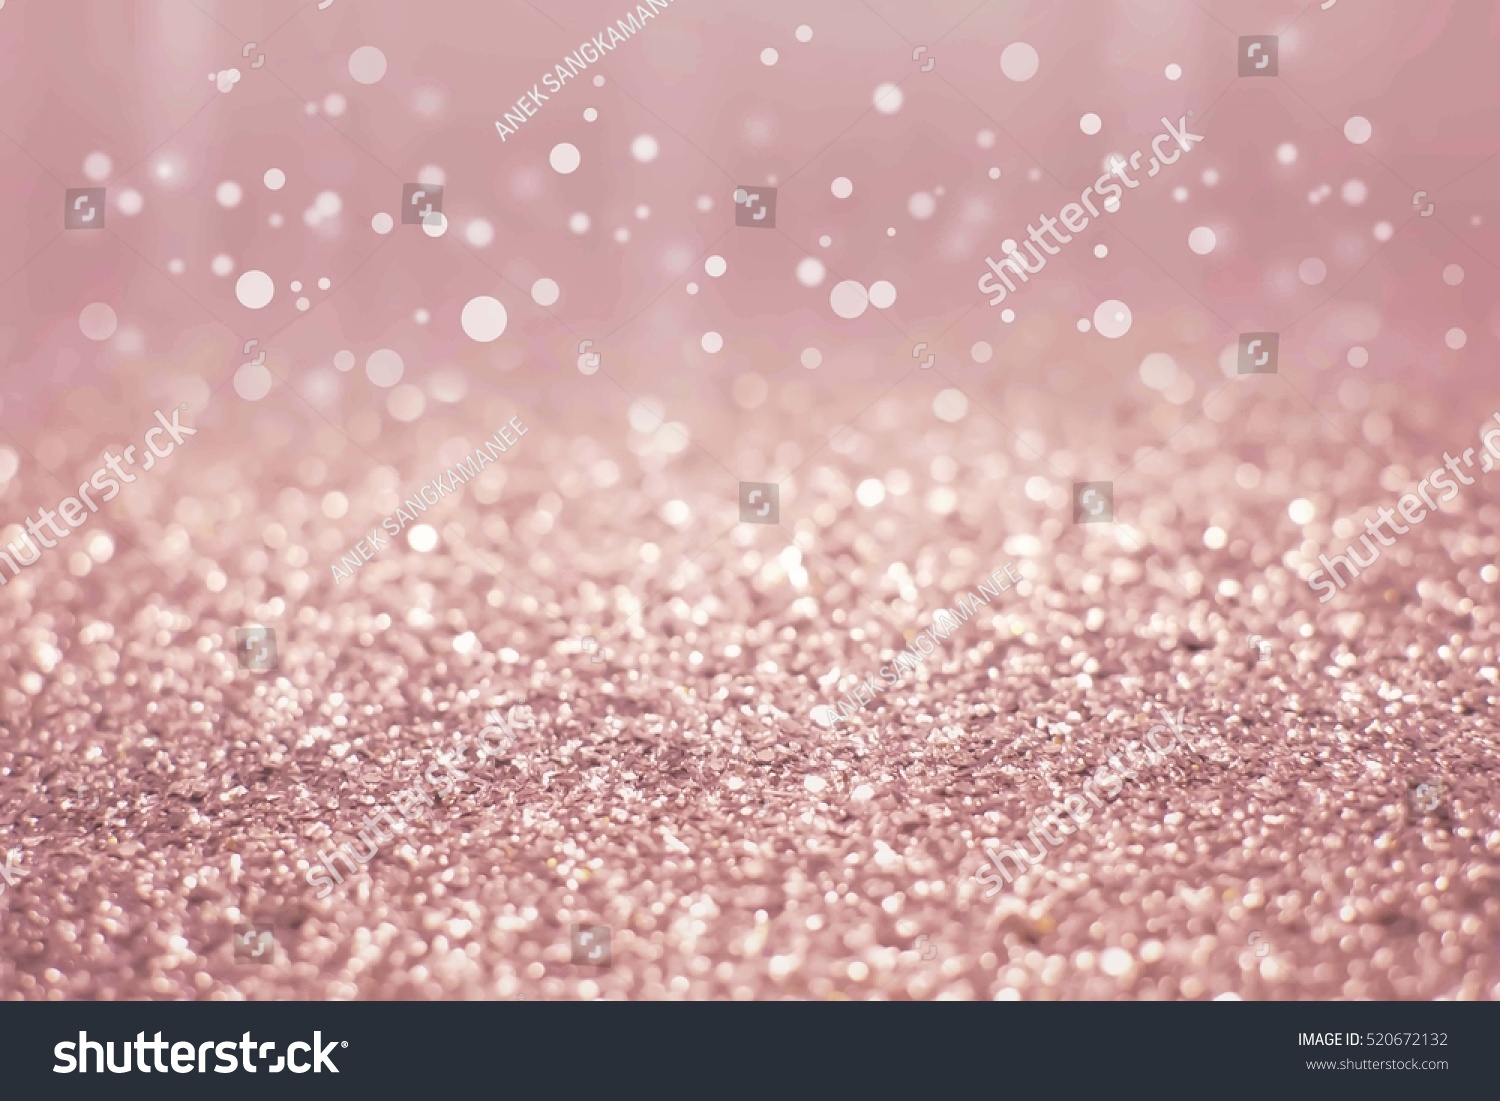 Rose Gold Silver Abstract Glowing Christmas Stock Illustration 520672132 - Shutterstock